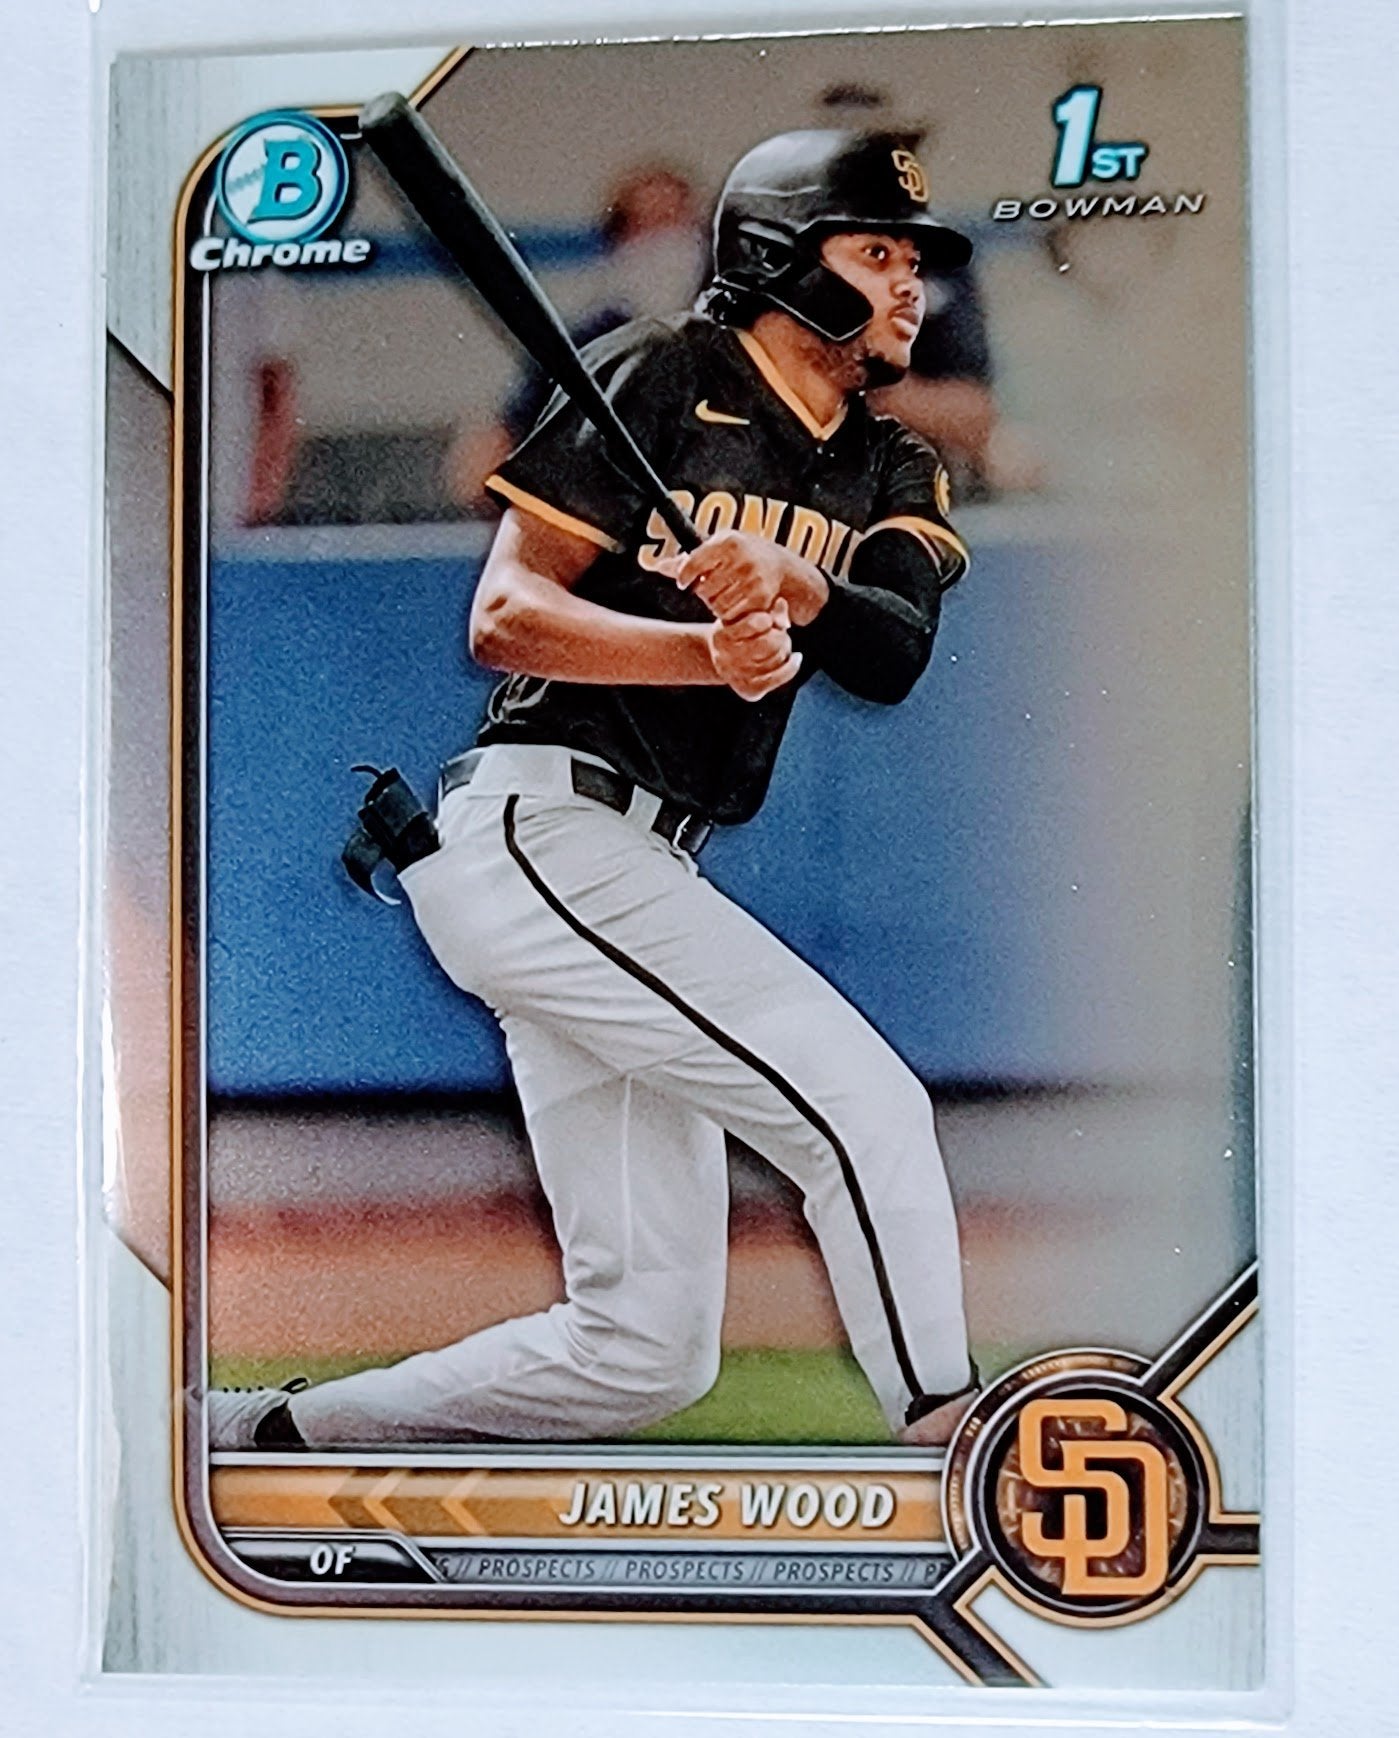 2022 Bowman Chrome James Wood 1st on Bowman Baseball Trading Card SMCB1 simple Xclusive Collectibles   